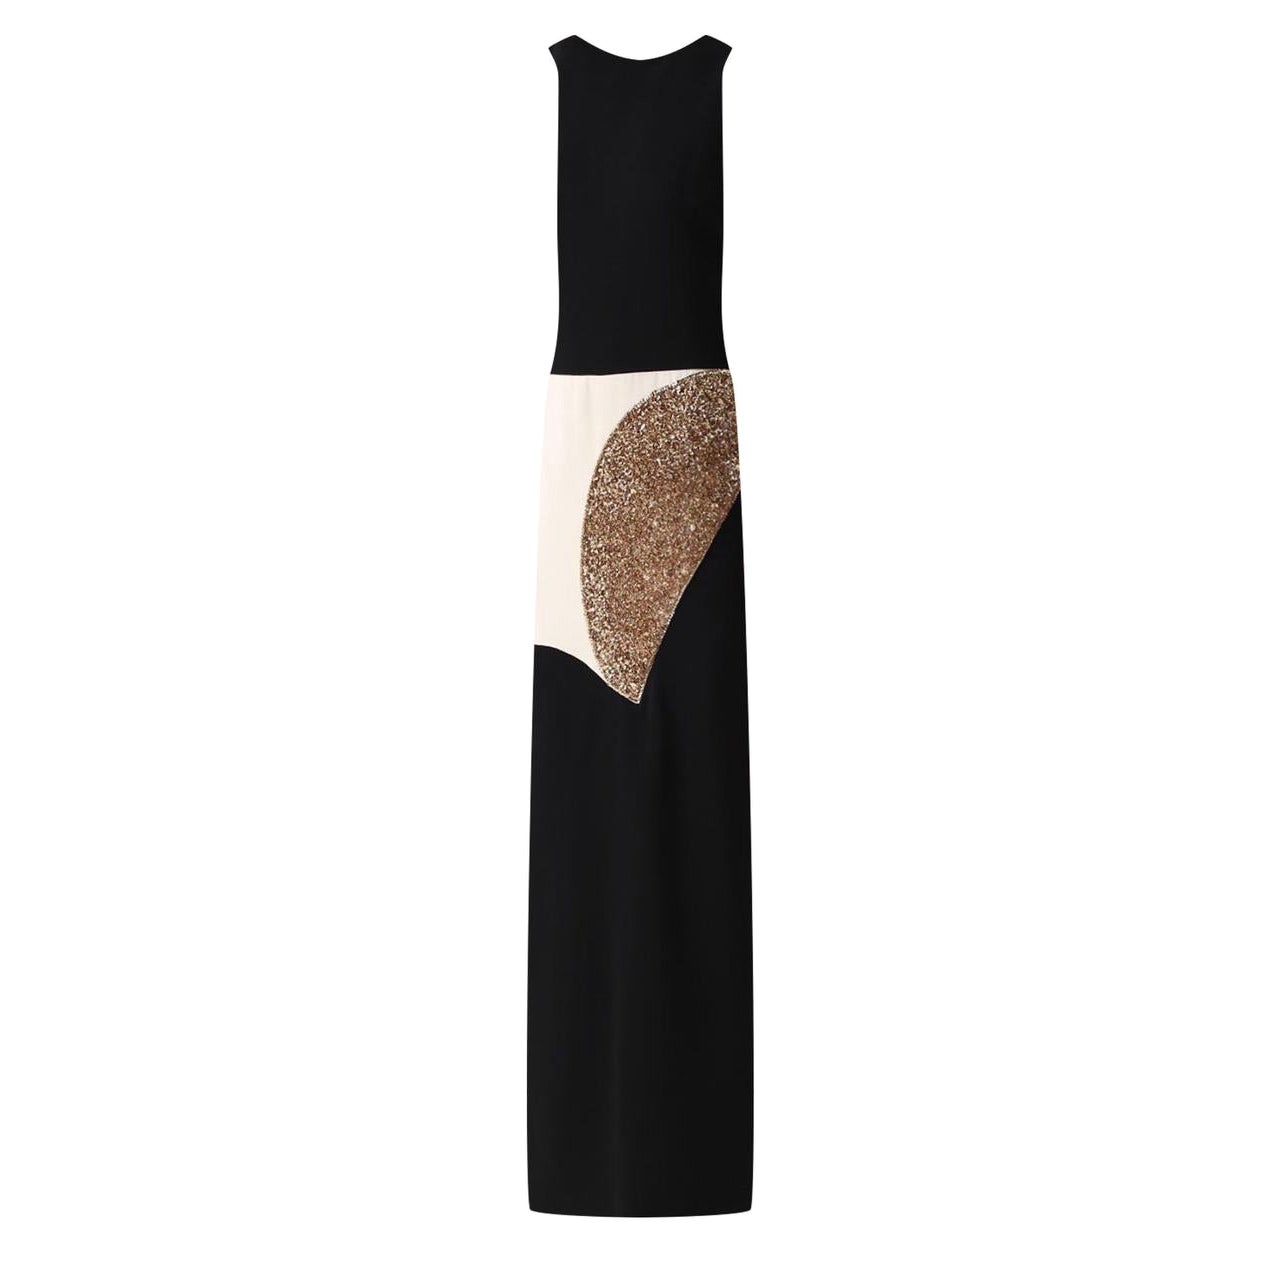 NEW TOM FORD LOND BLACK SILK DRESS with WHITE and GOLD DETAILS IT 38 - 2